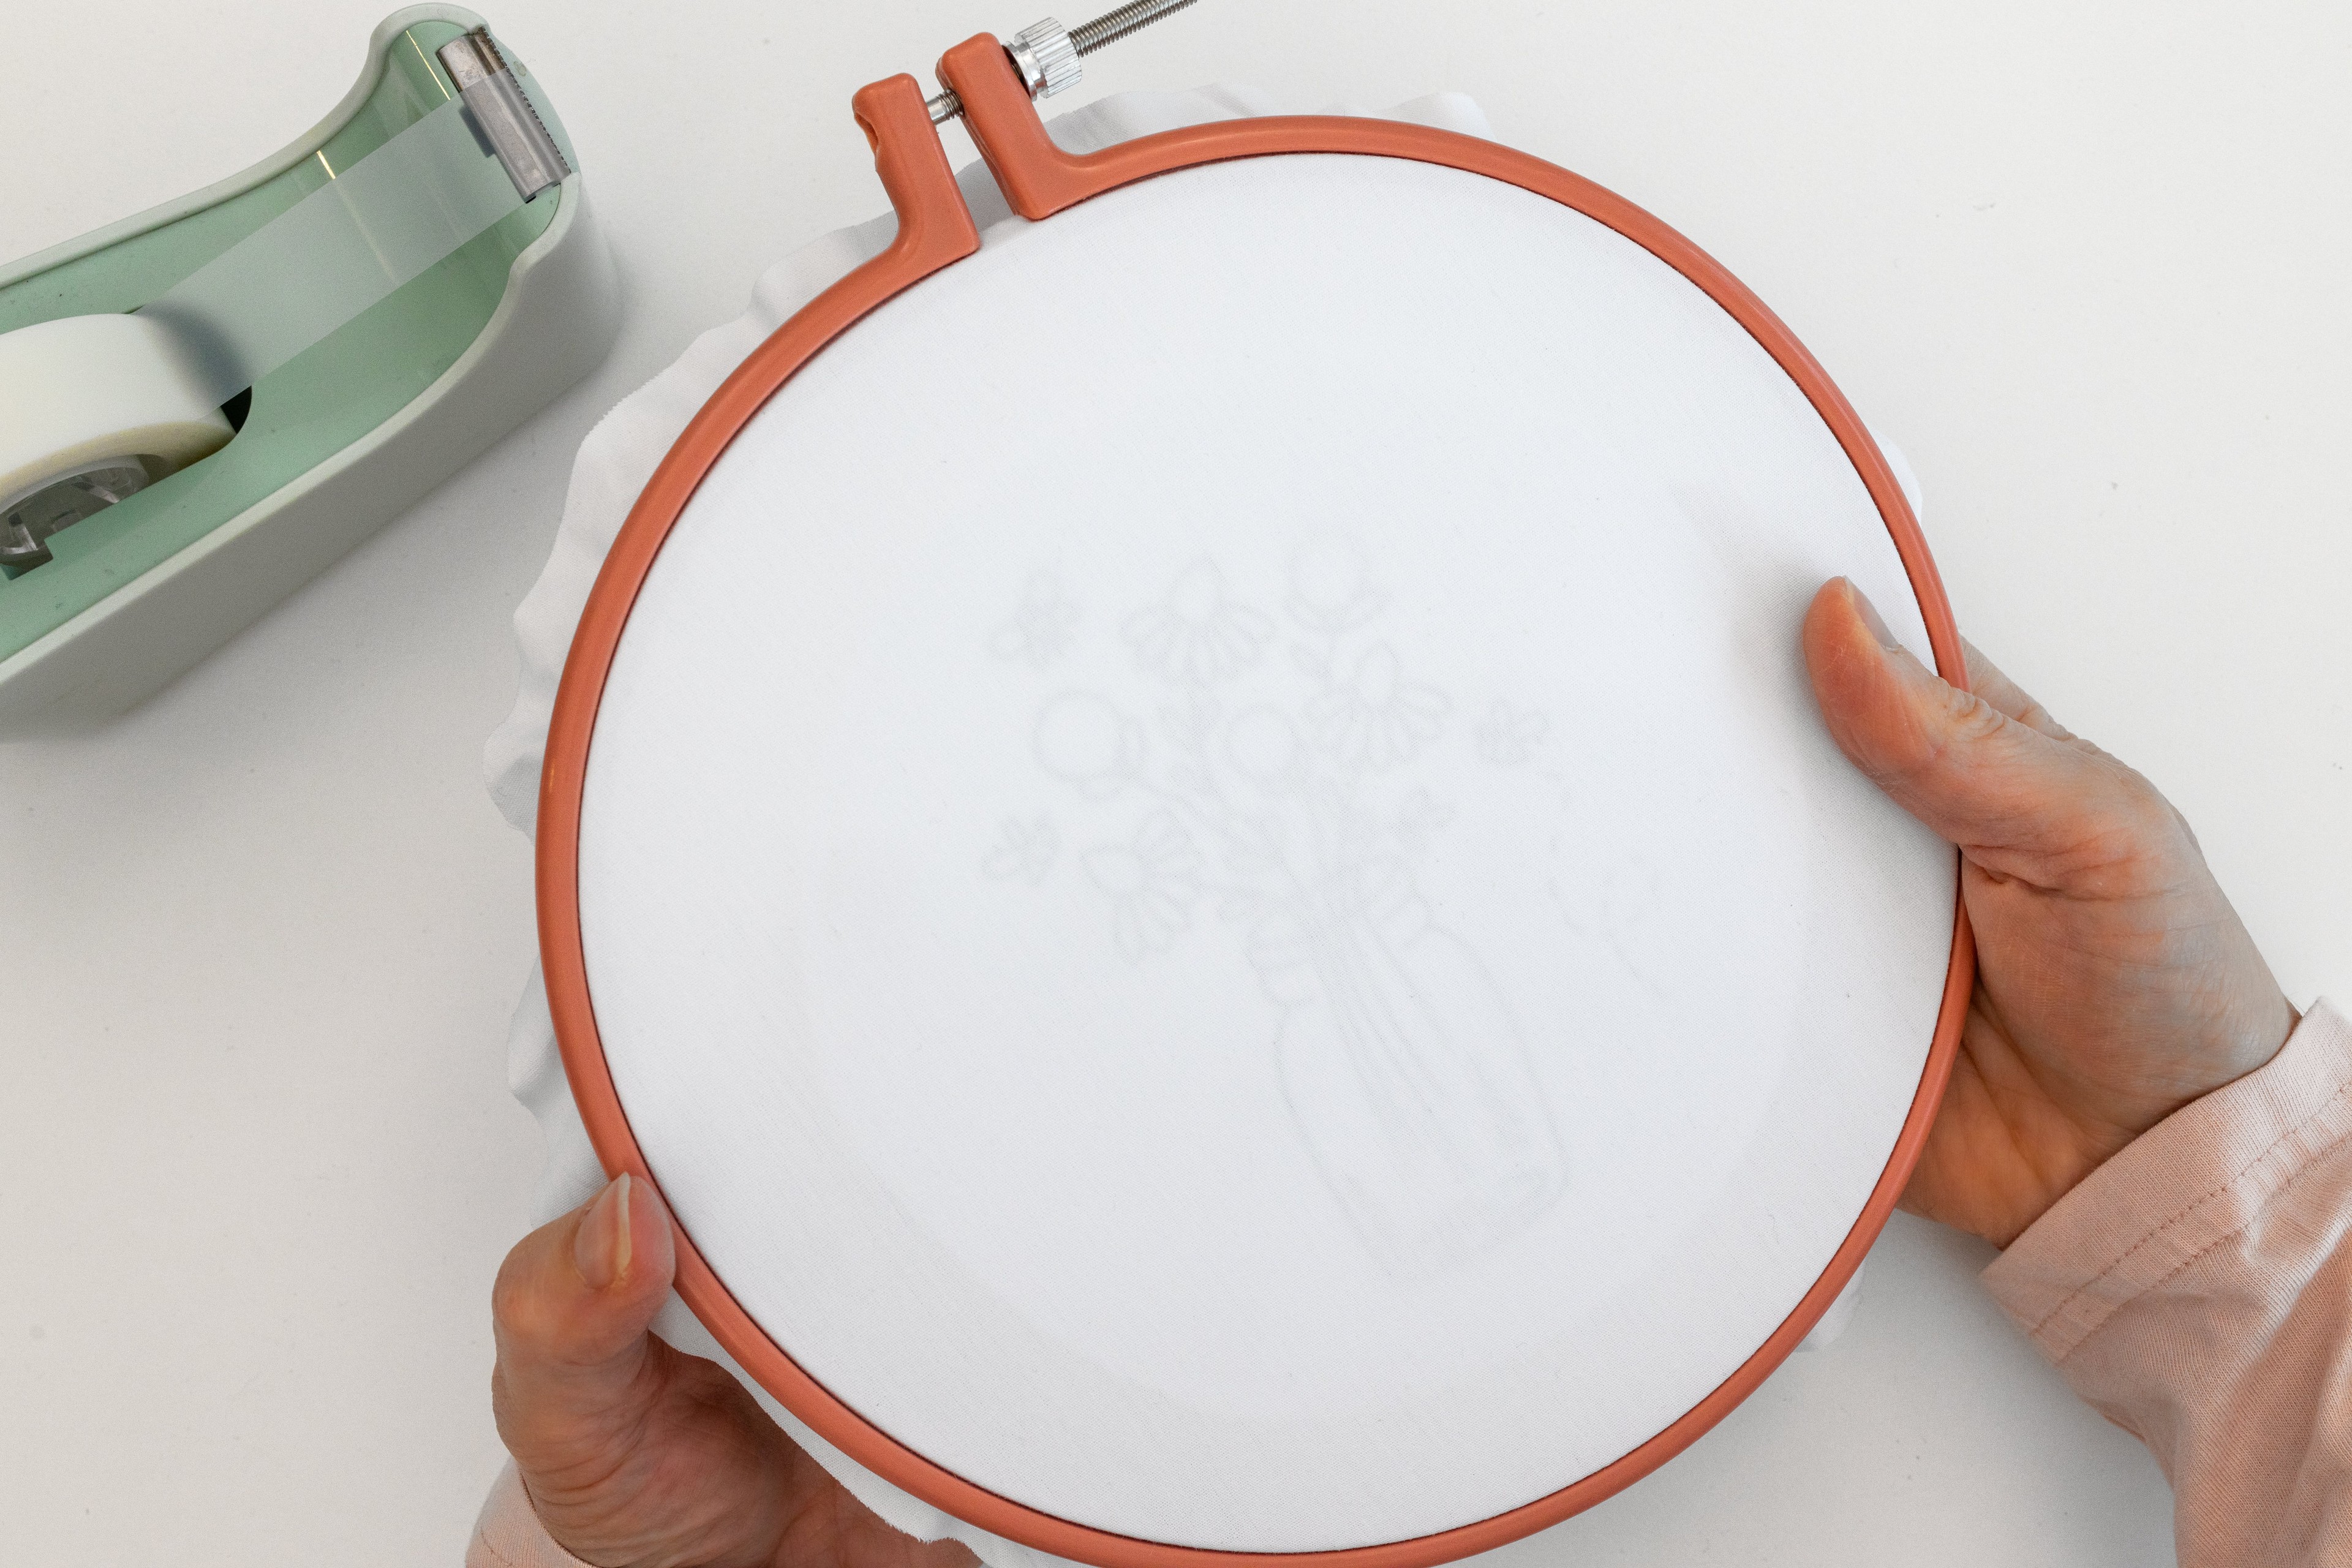 A hand holds the hoop up so you can see the pattern on the underside of the hoop.